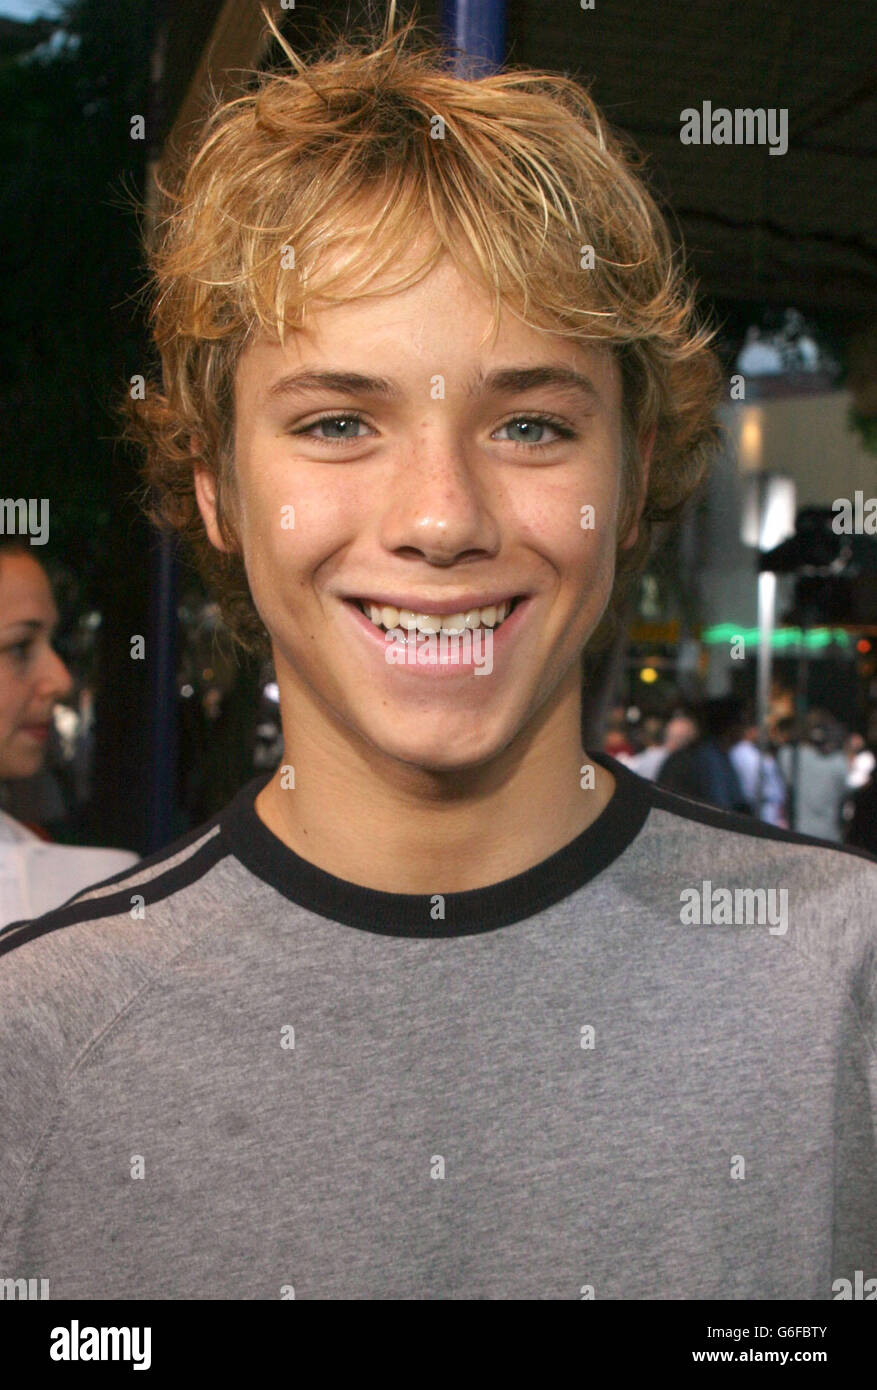 Sumpter - S.W.A.T Premiere. Jeremy Sumpter arriving at the S.W.A.T World premiere at the Mann Village Theatre. Stock Photo